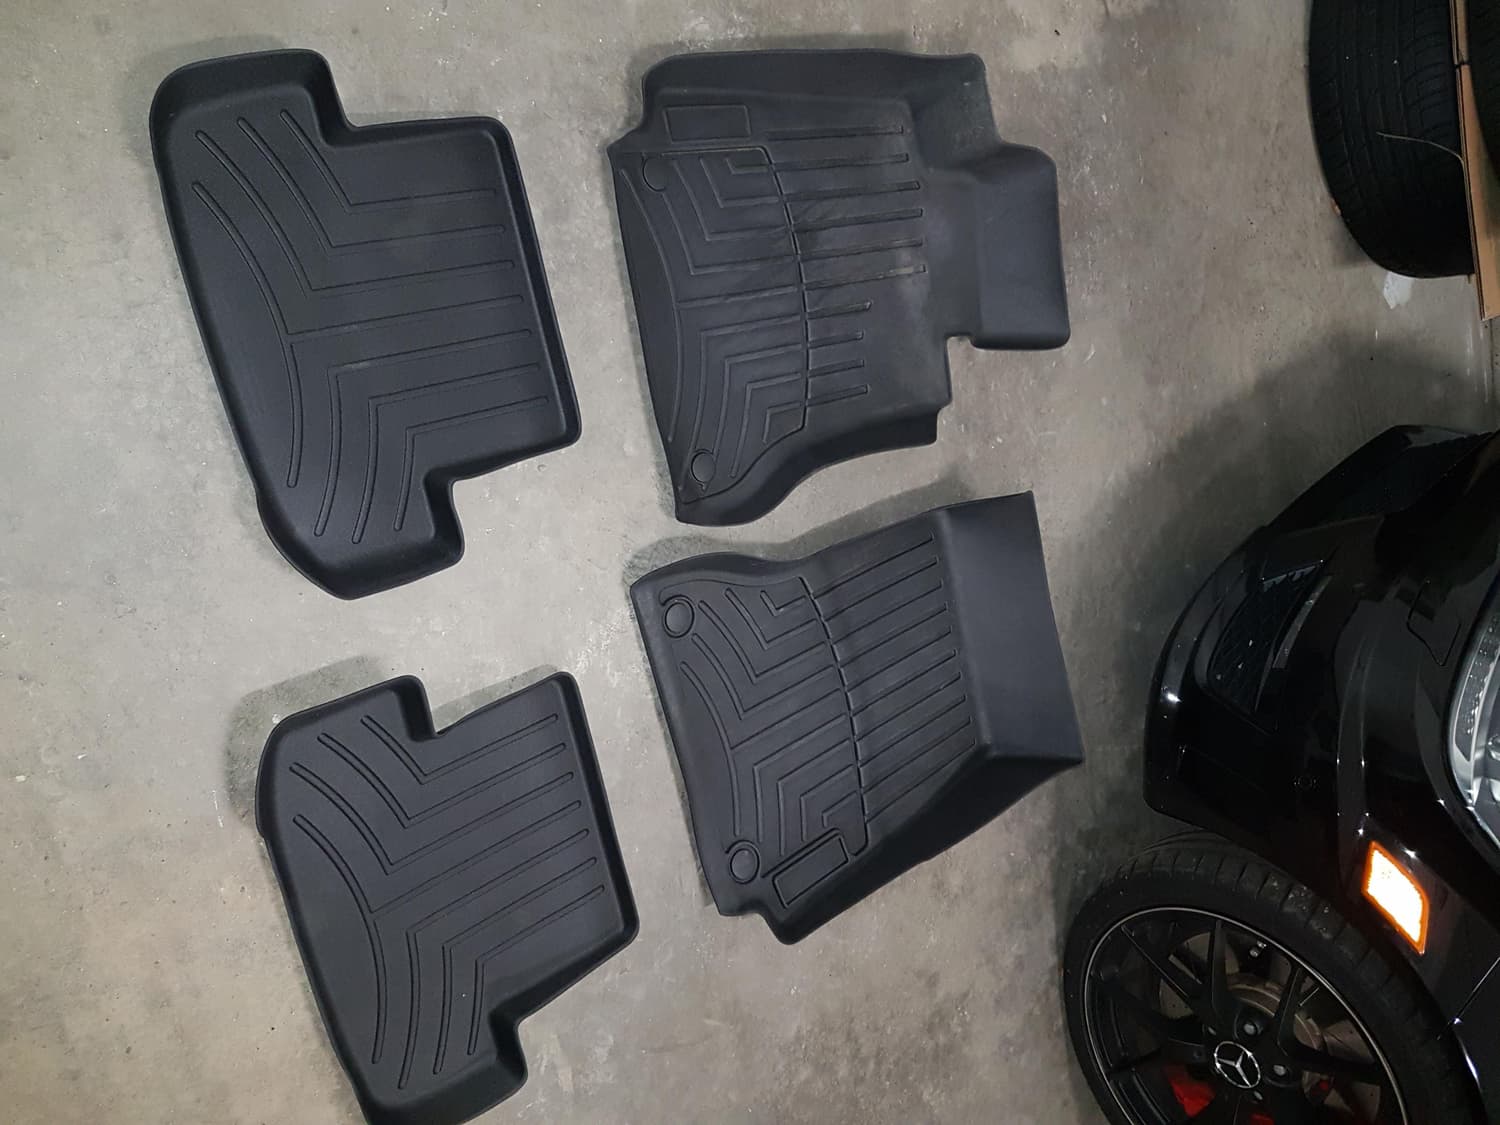 Interior/Upholstery - weather tech laser fitted mats - Used - 2010 to 2015 Mercedes-Benz C63 AMG - Medicine Hat, AB T1B 0N, Canada